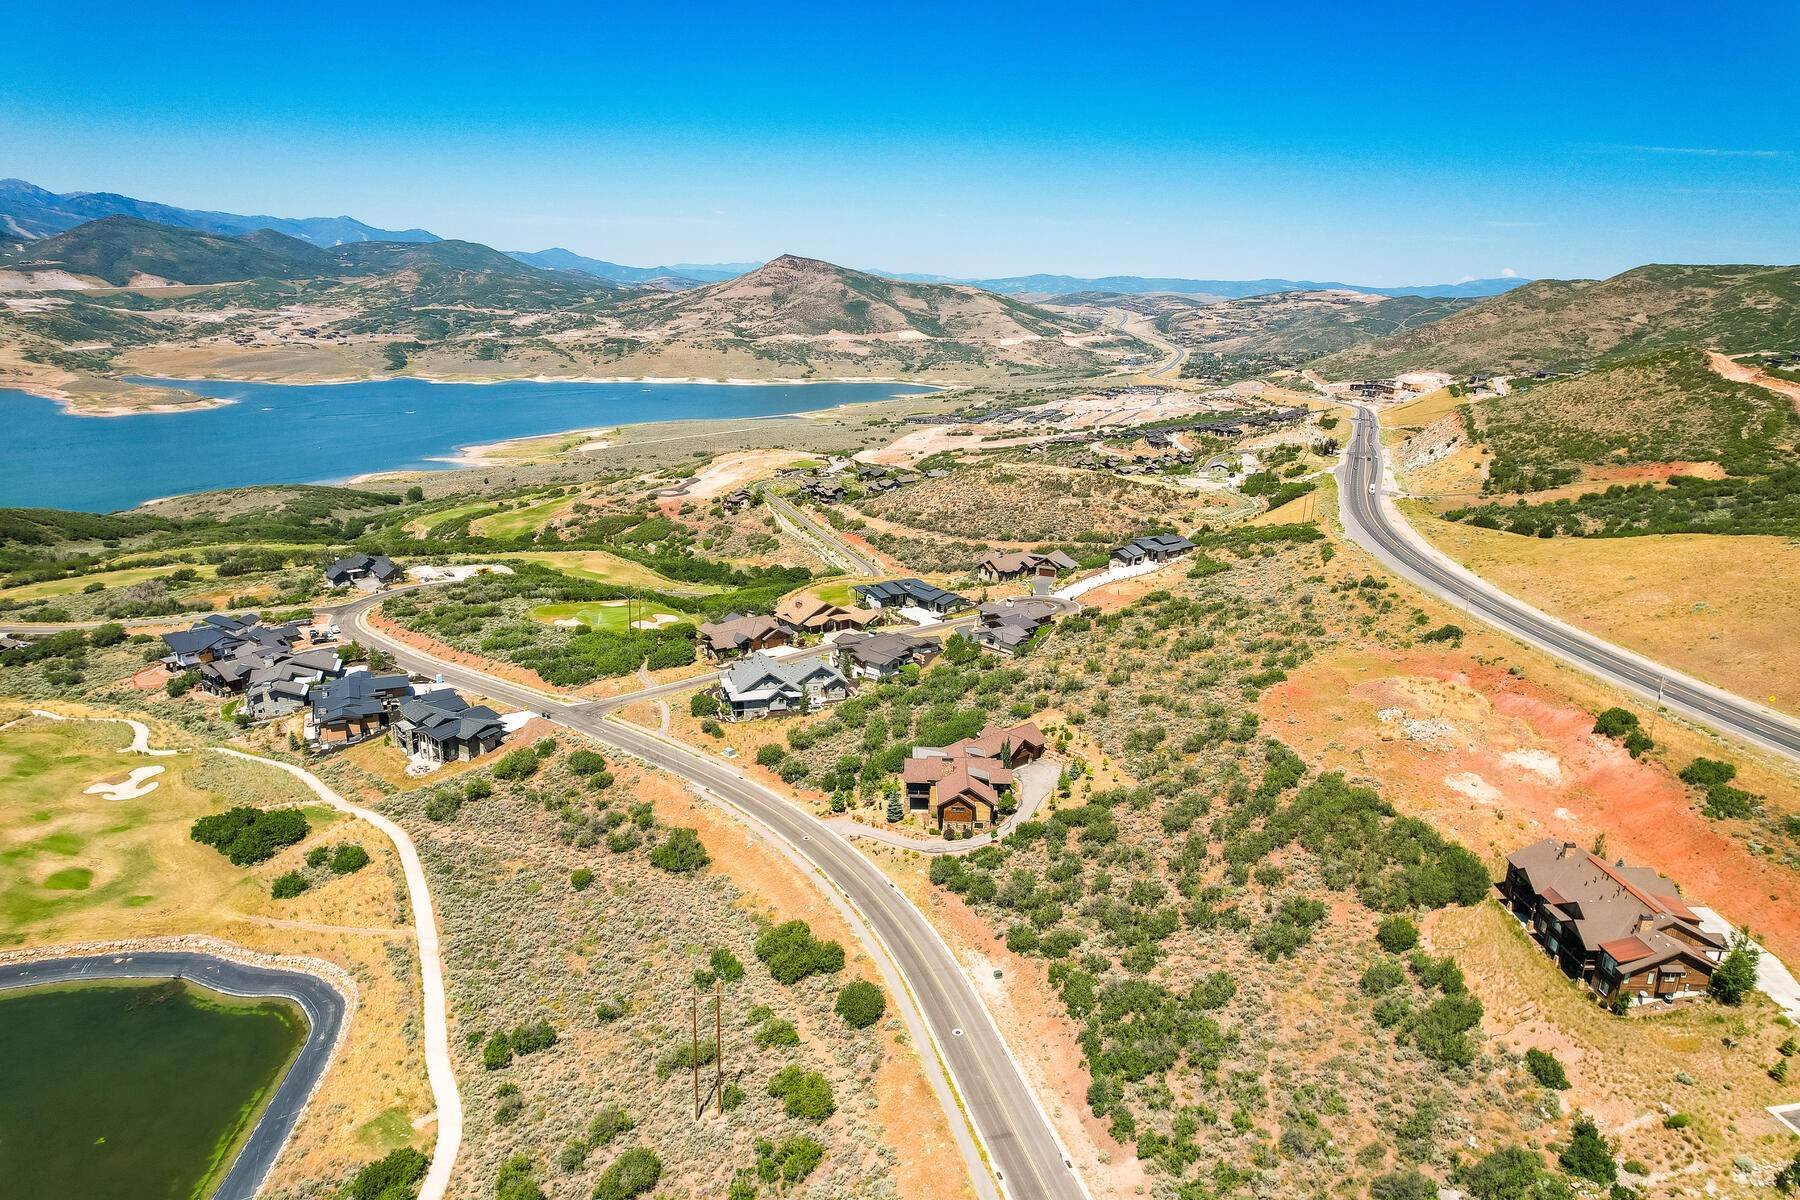 4. Land for Sale at Breathtaking Mountain, Water Views and Dedicated Open Space 10 Minutes to Park C 1305 E Longview Dr, Lot 11 Heber City, Utah 84032 United States